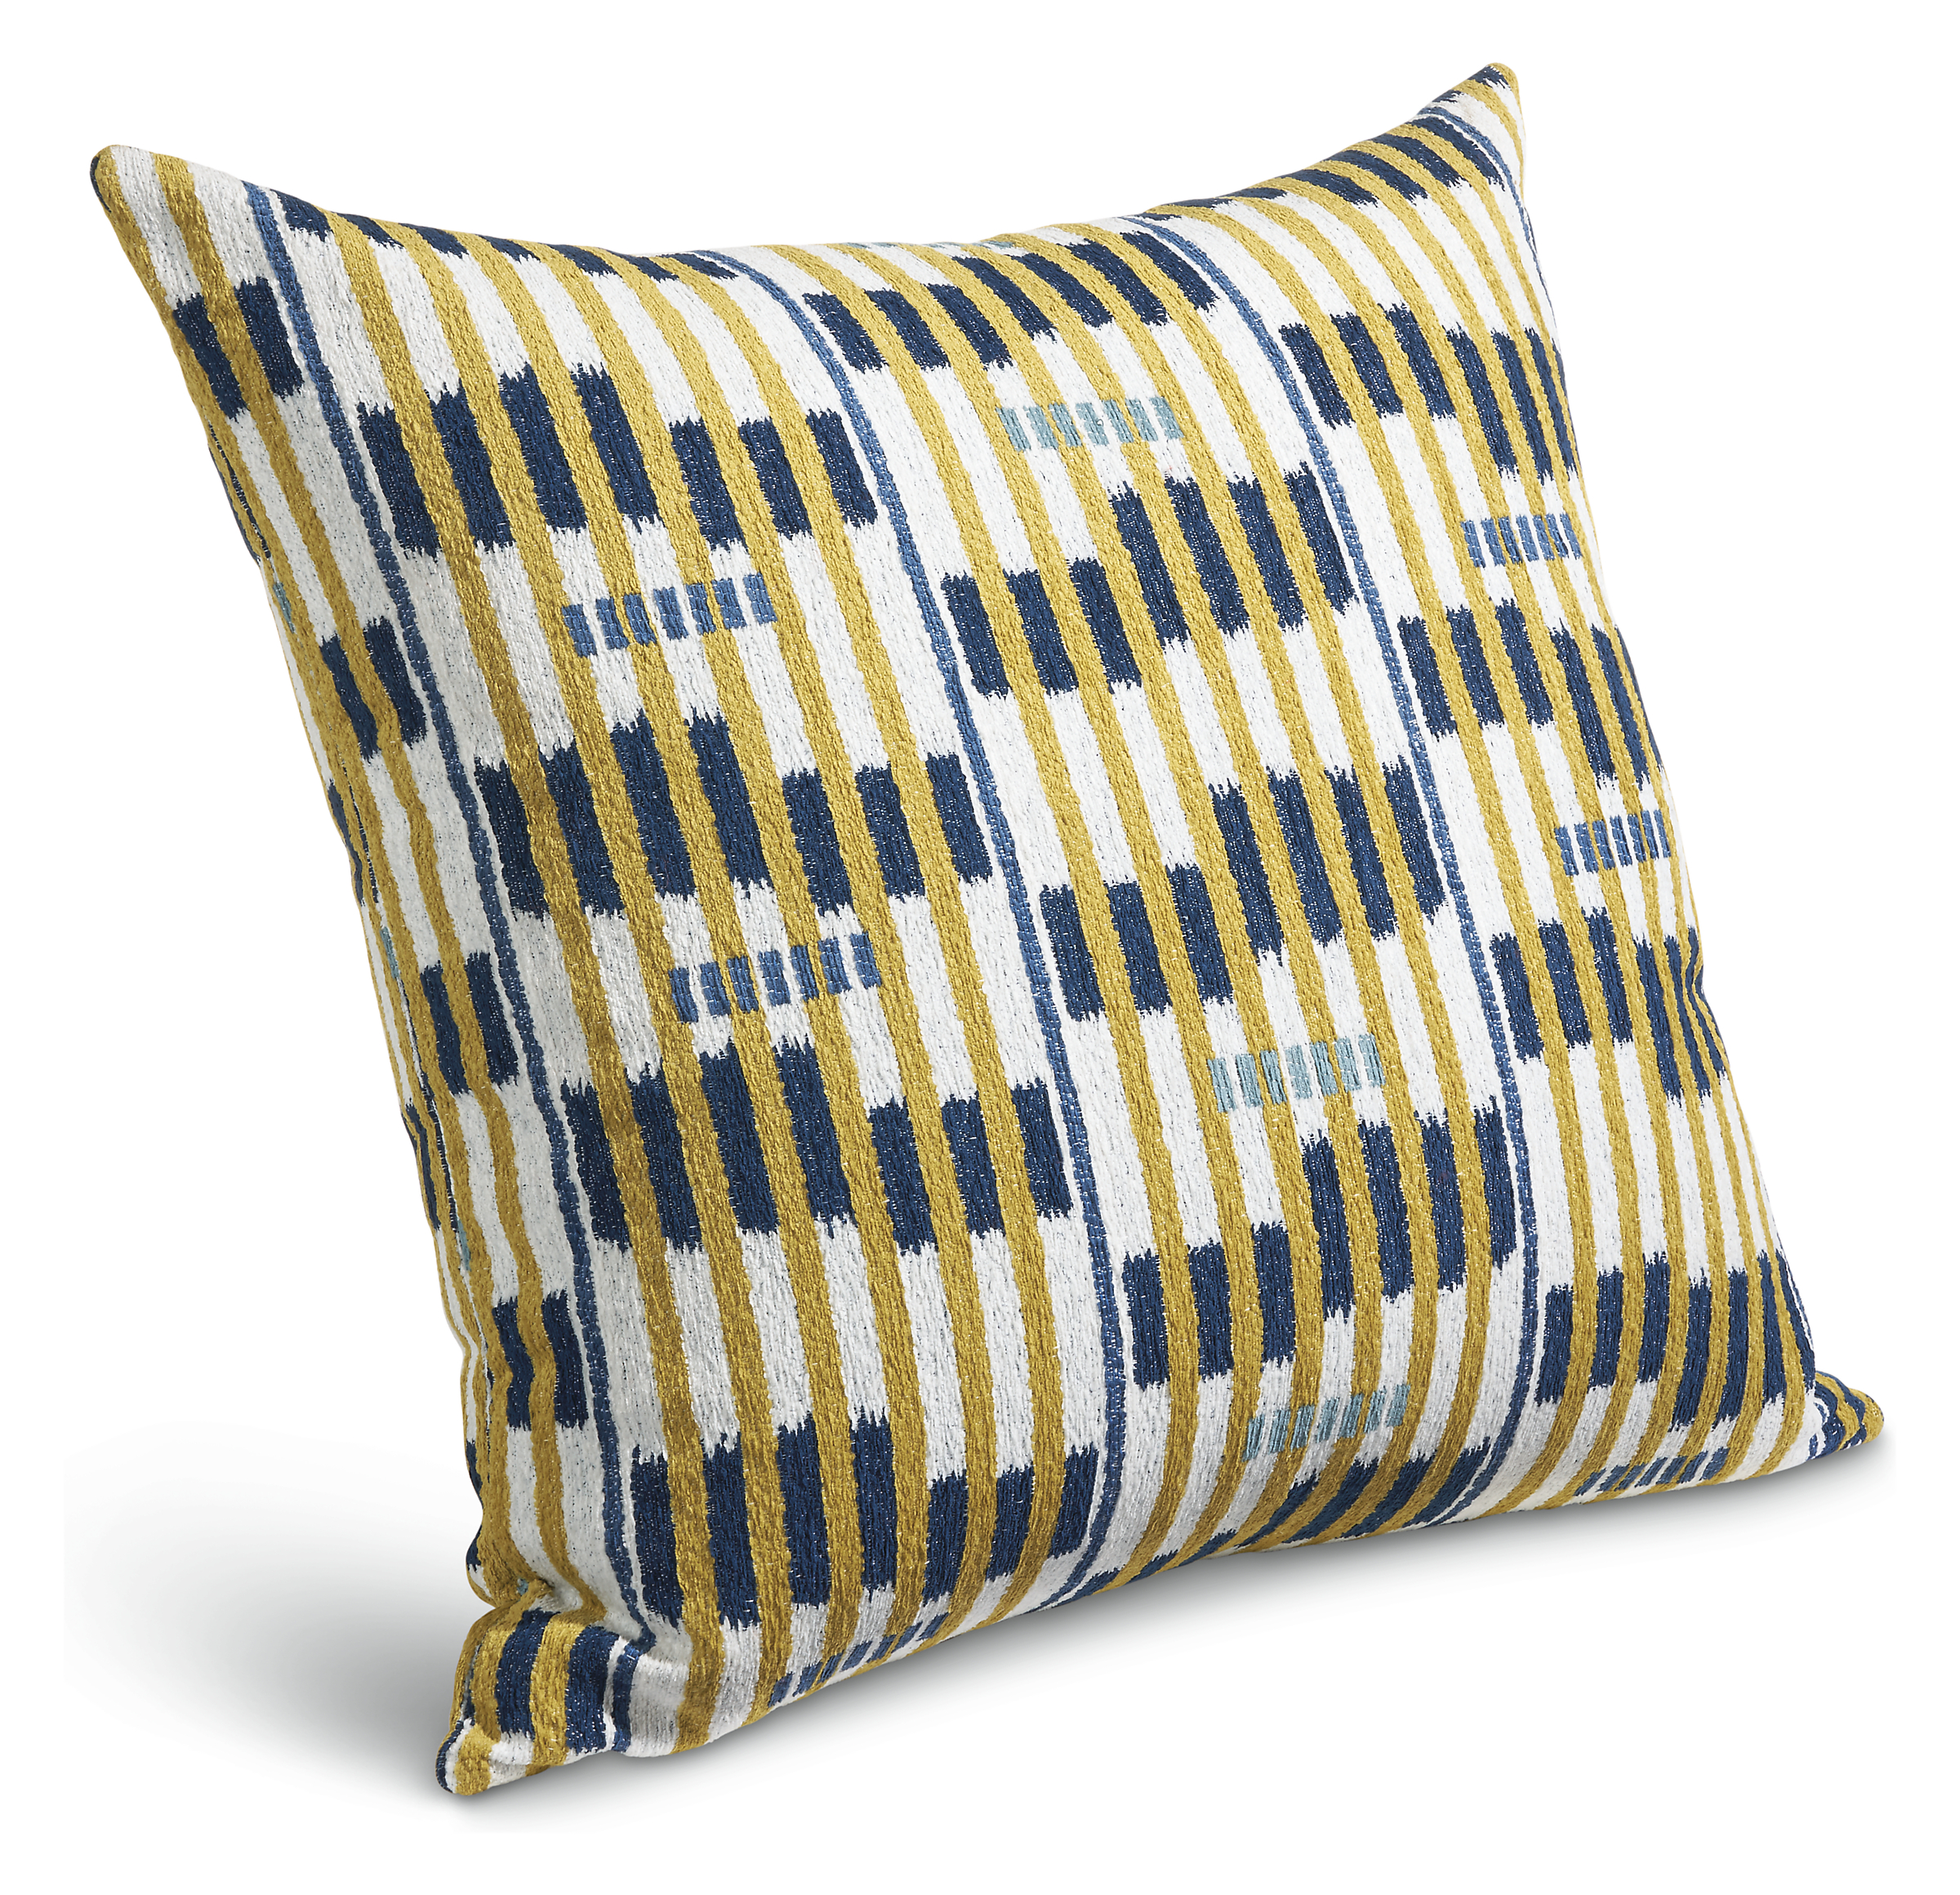 Catalina 24w 24h Outdoor Pillow in Navy